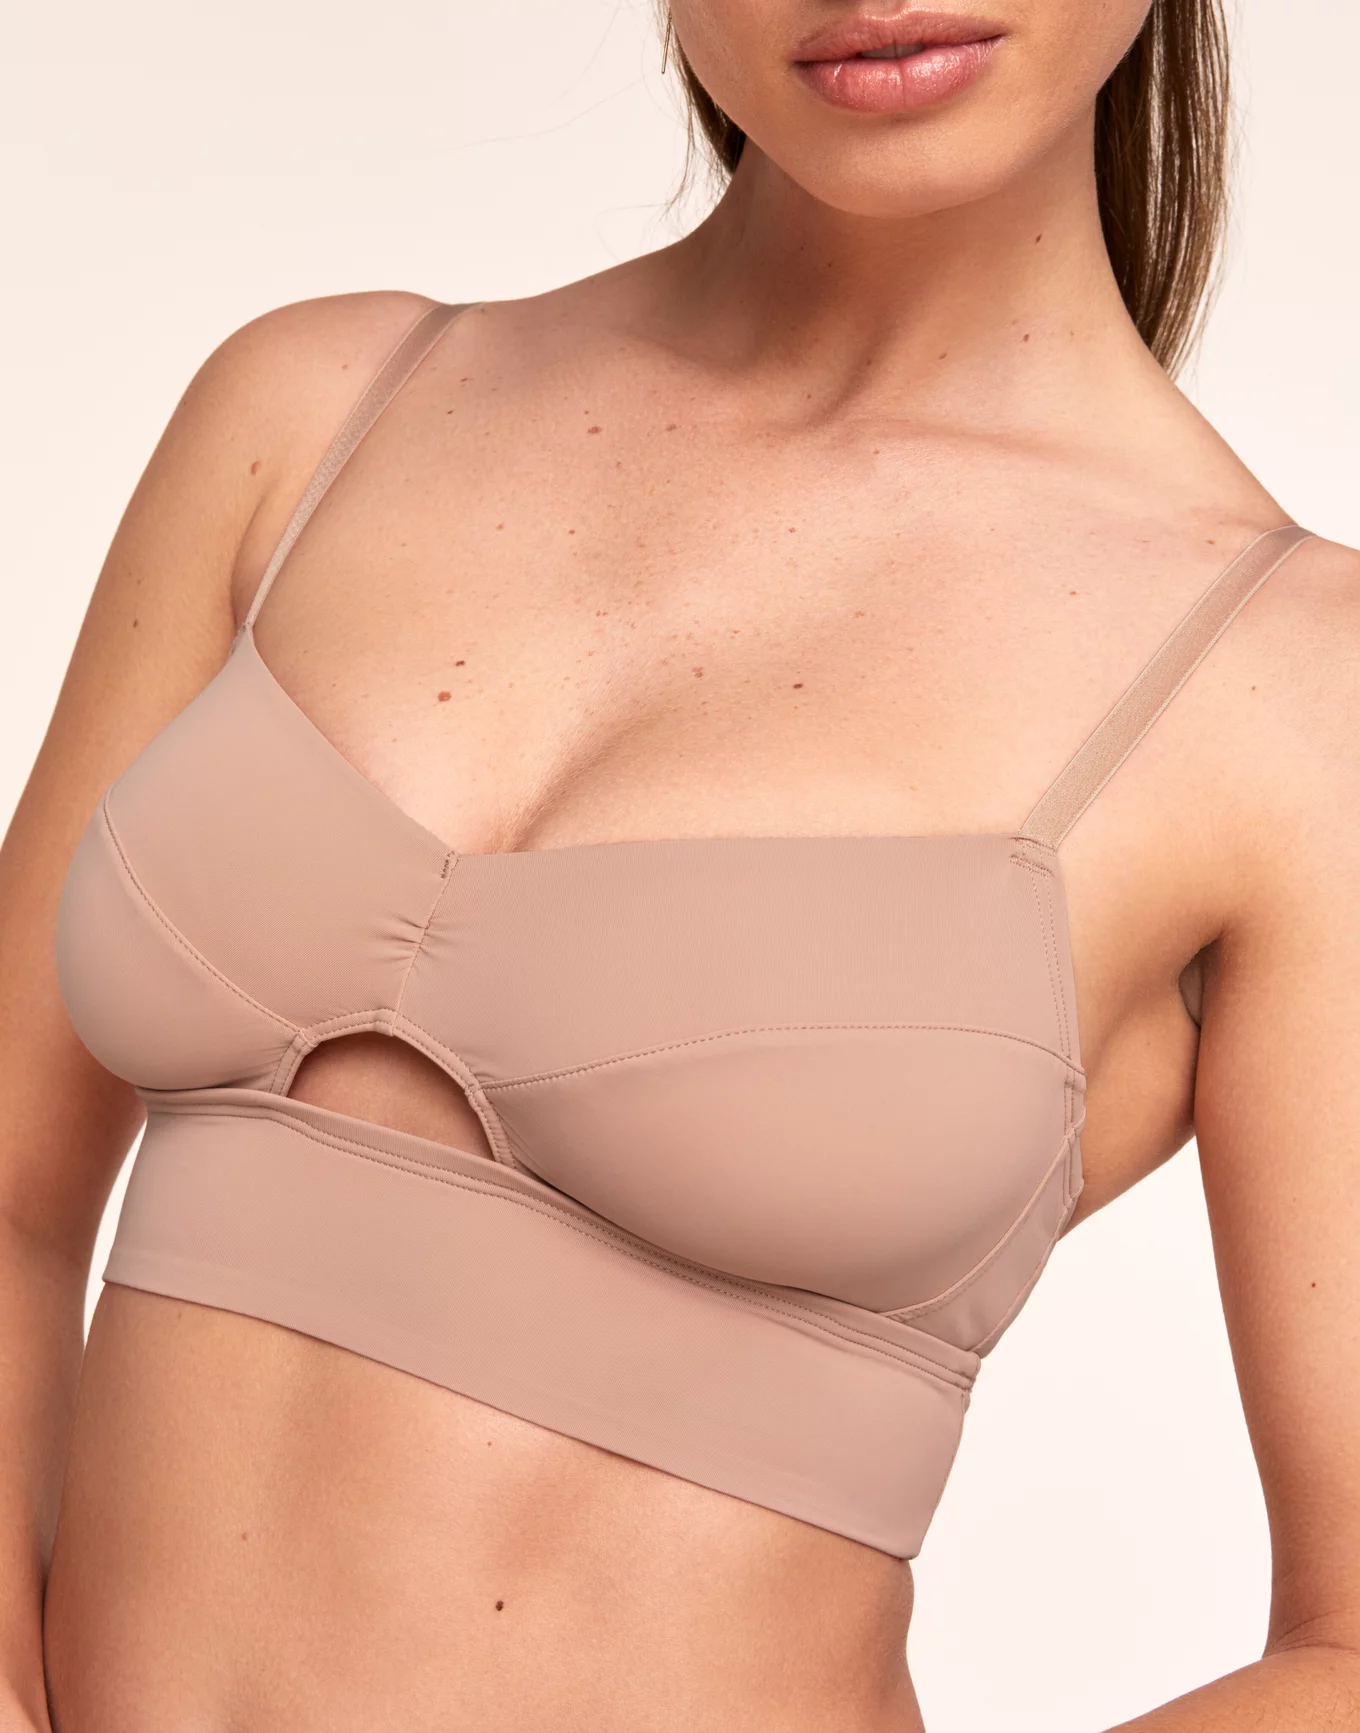 Full Coverage Bra | Double Layer Fabric | Non Padded Bra | B C D Cup Sizes  | Kamison 1108 -Skin (Pack of 2)